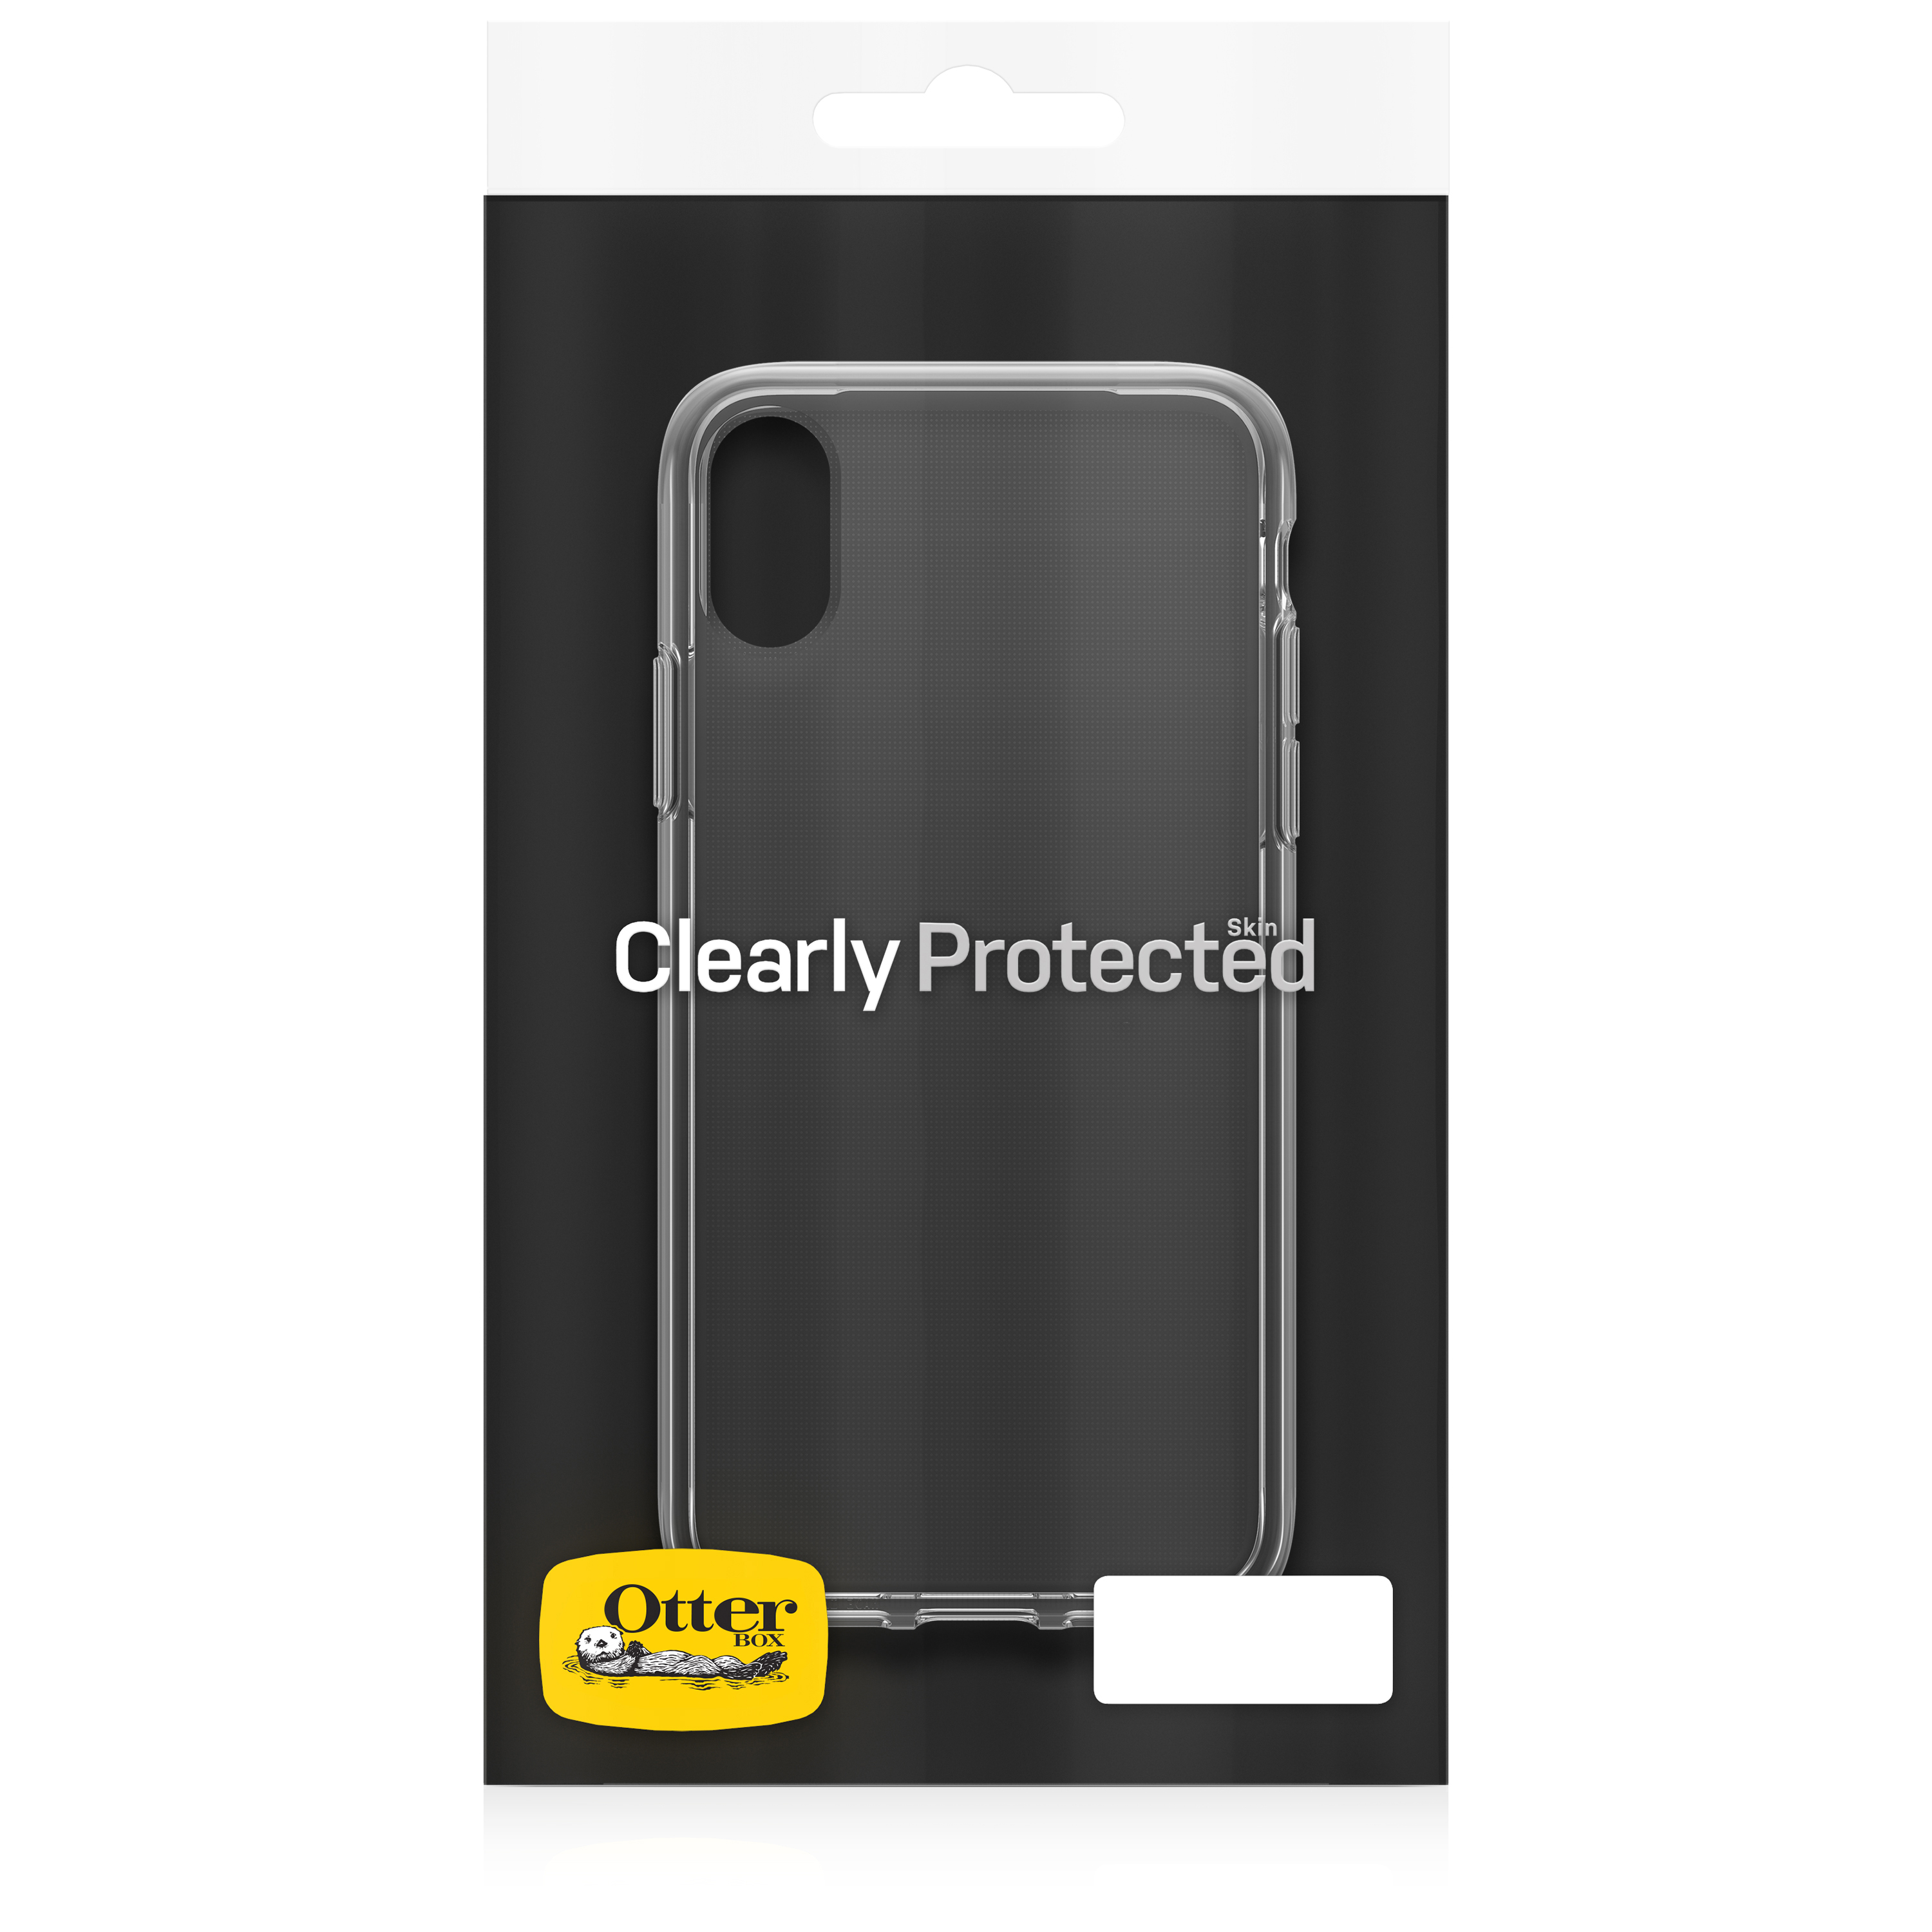 XS, Clearly Apple, Protected, iPhone Backcover, OTTERBOX Transparent